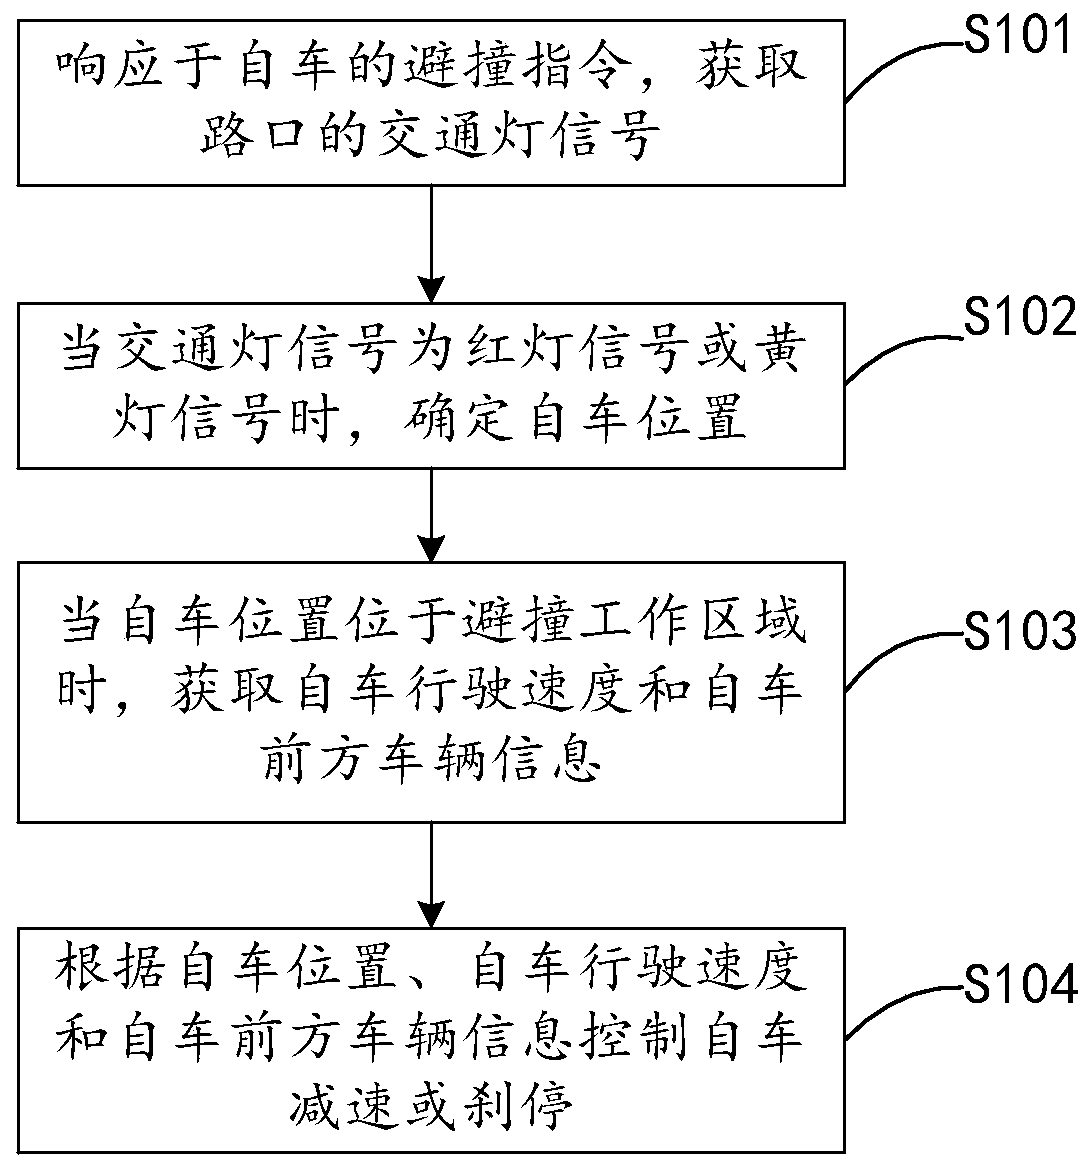 Collision avoidance method and system based on traffic light signals and vehicle